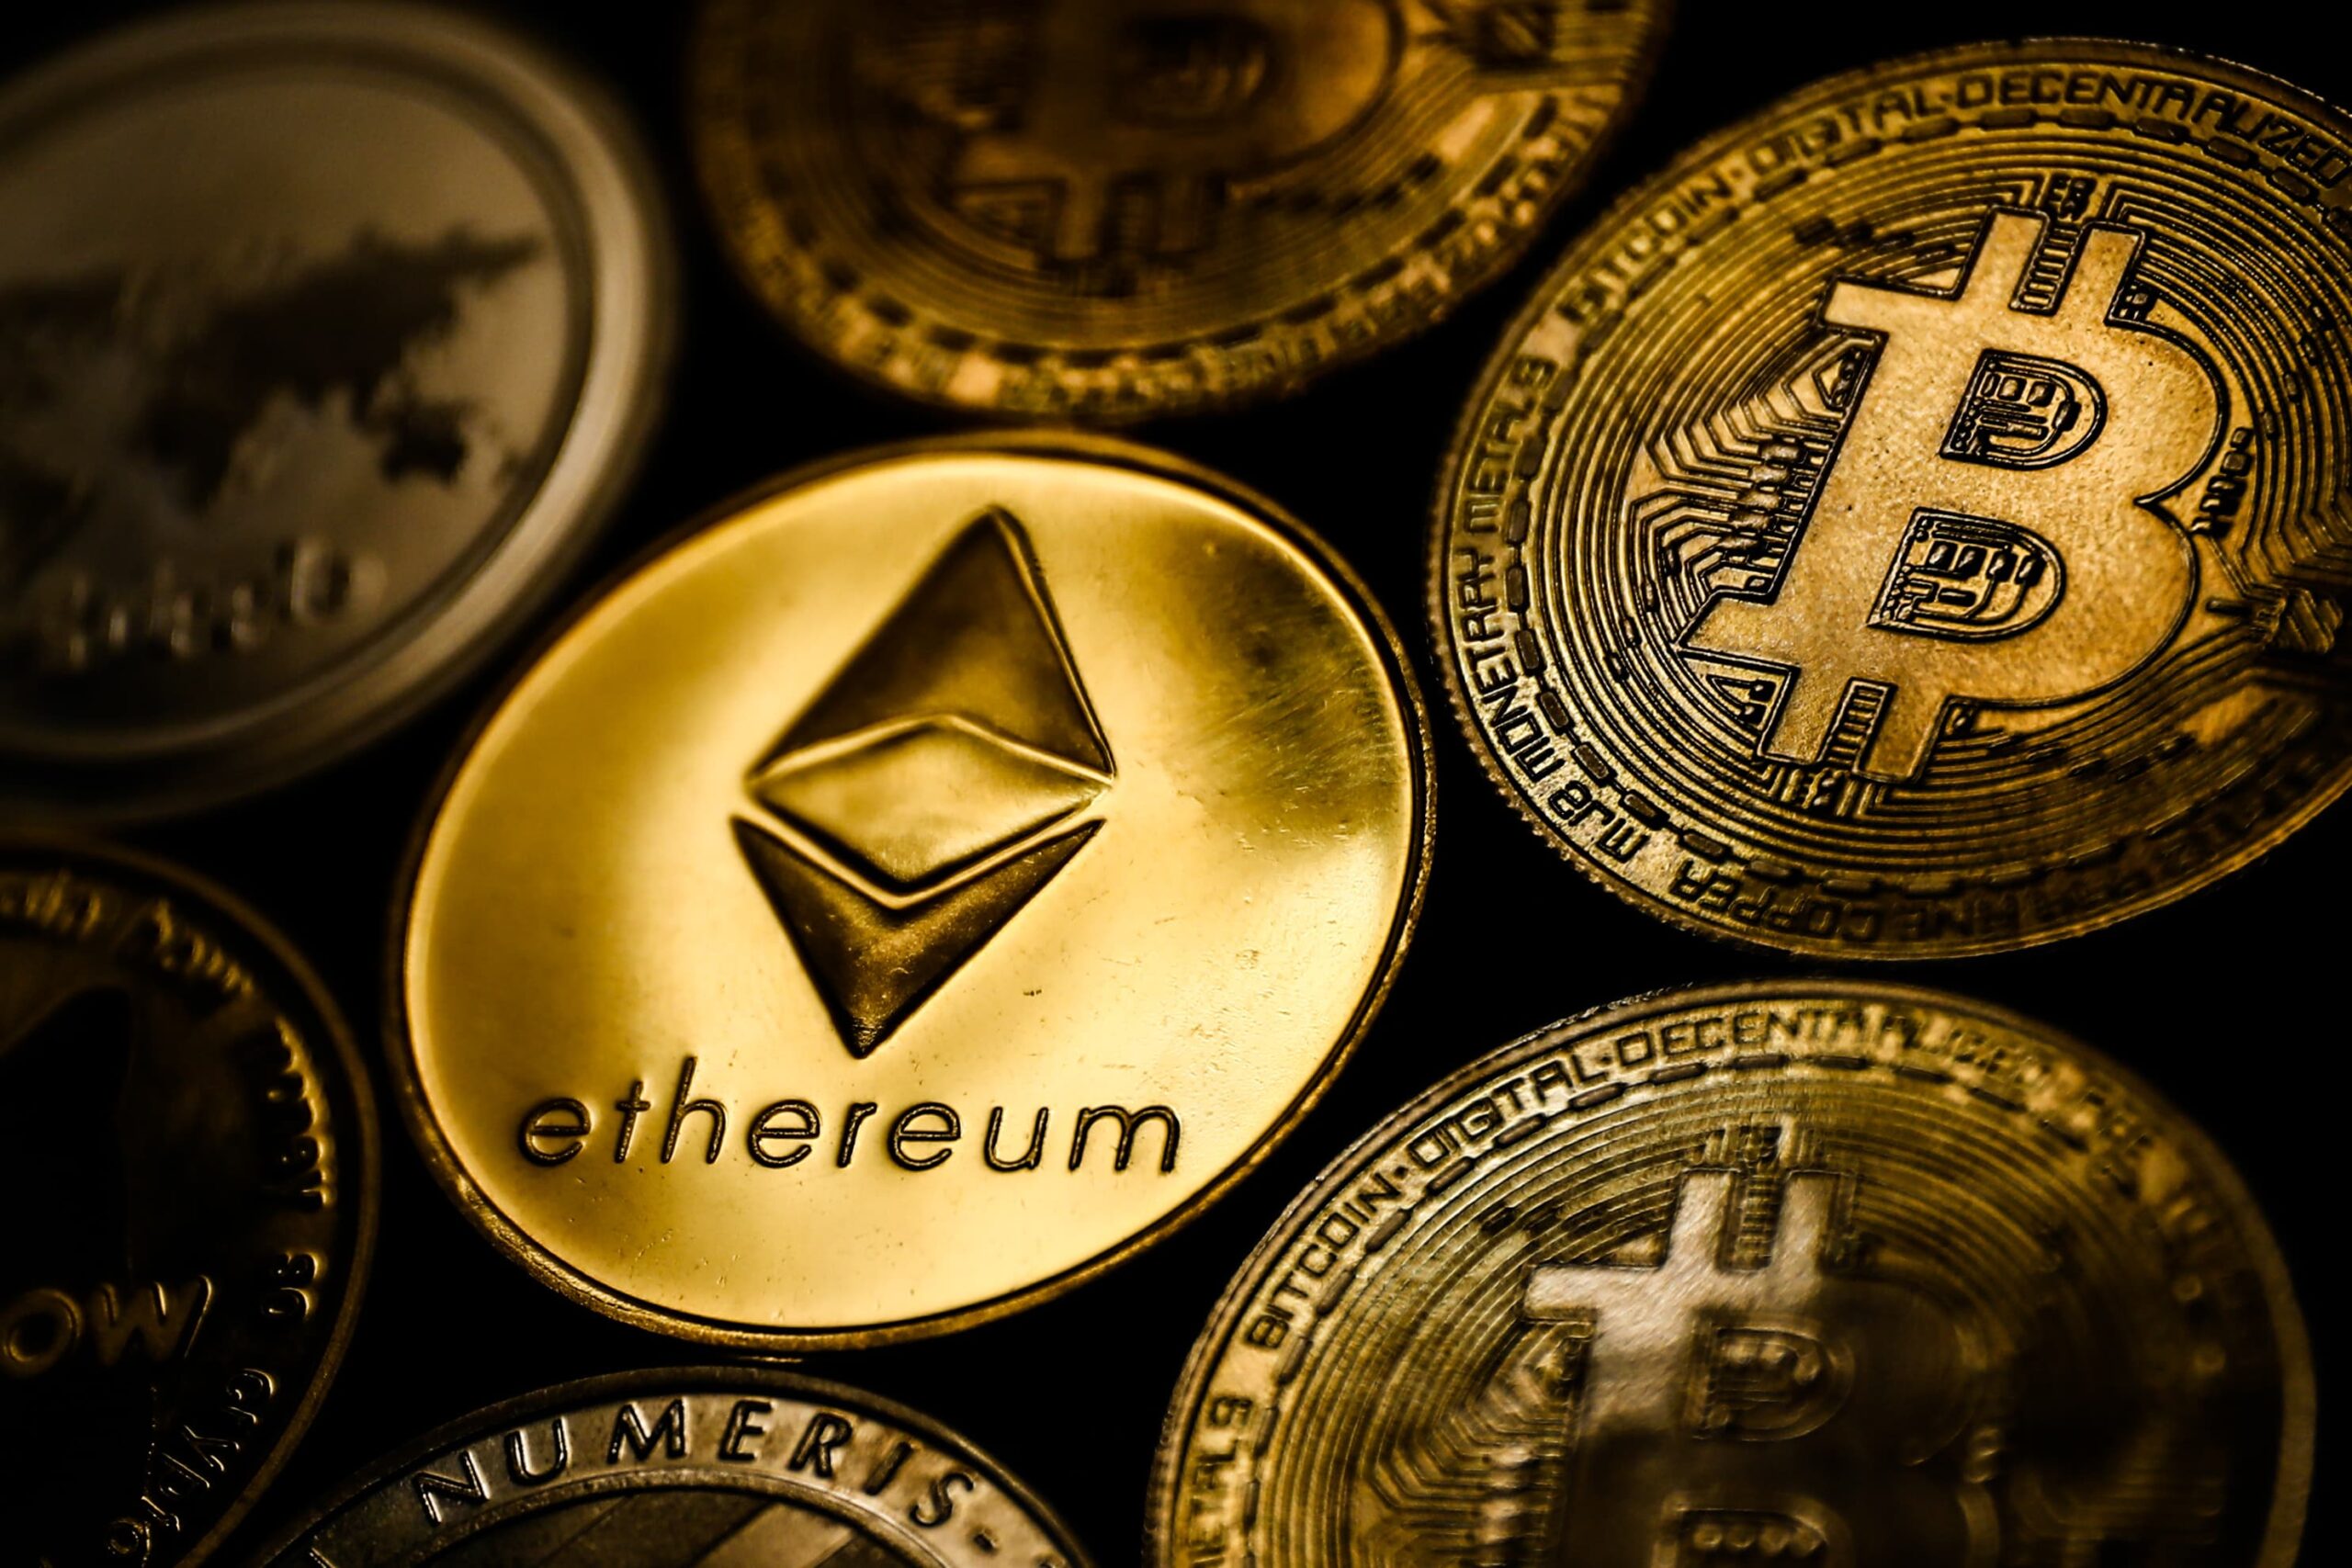 Top 10 cryptocurrencies to invest in 2021: portfolio of coins set to explode